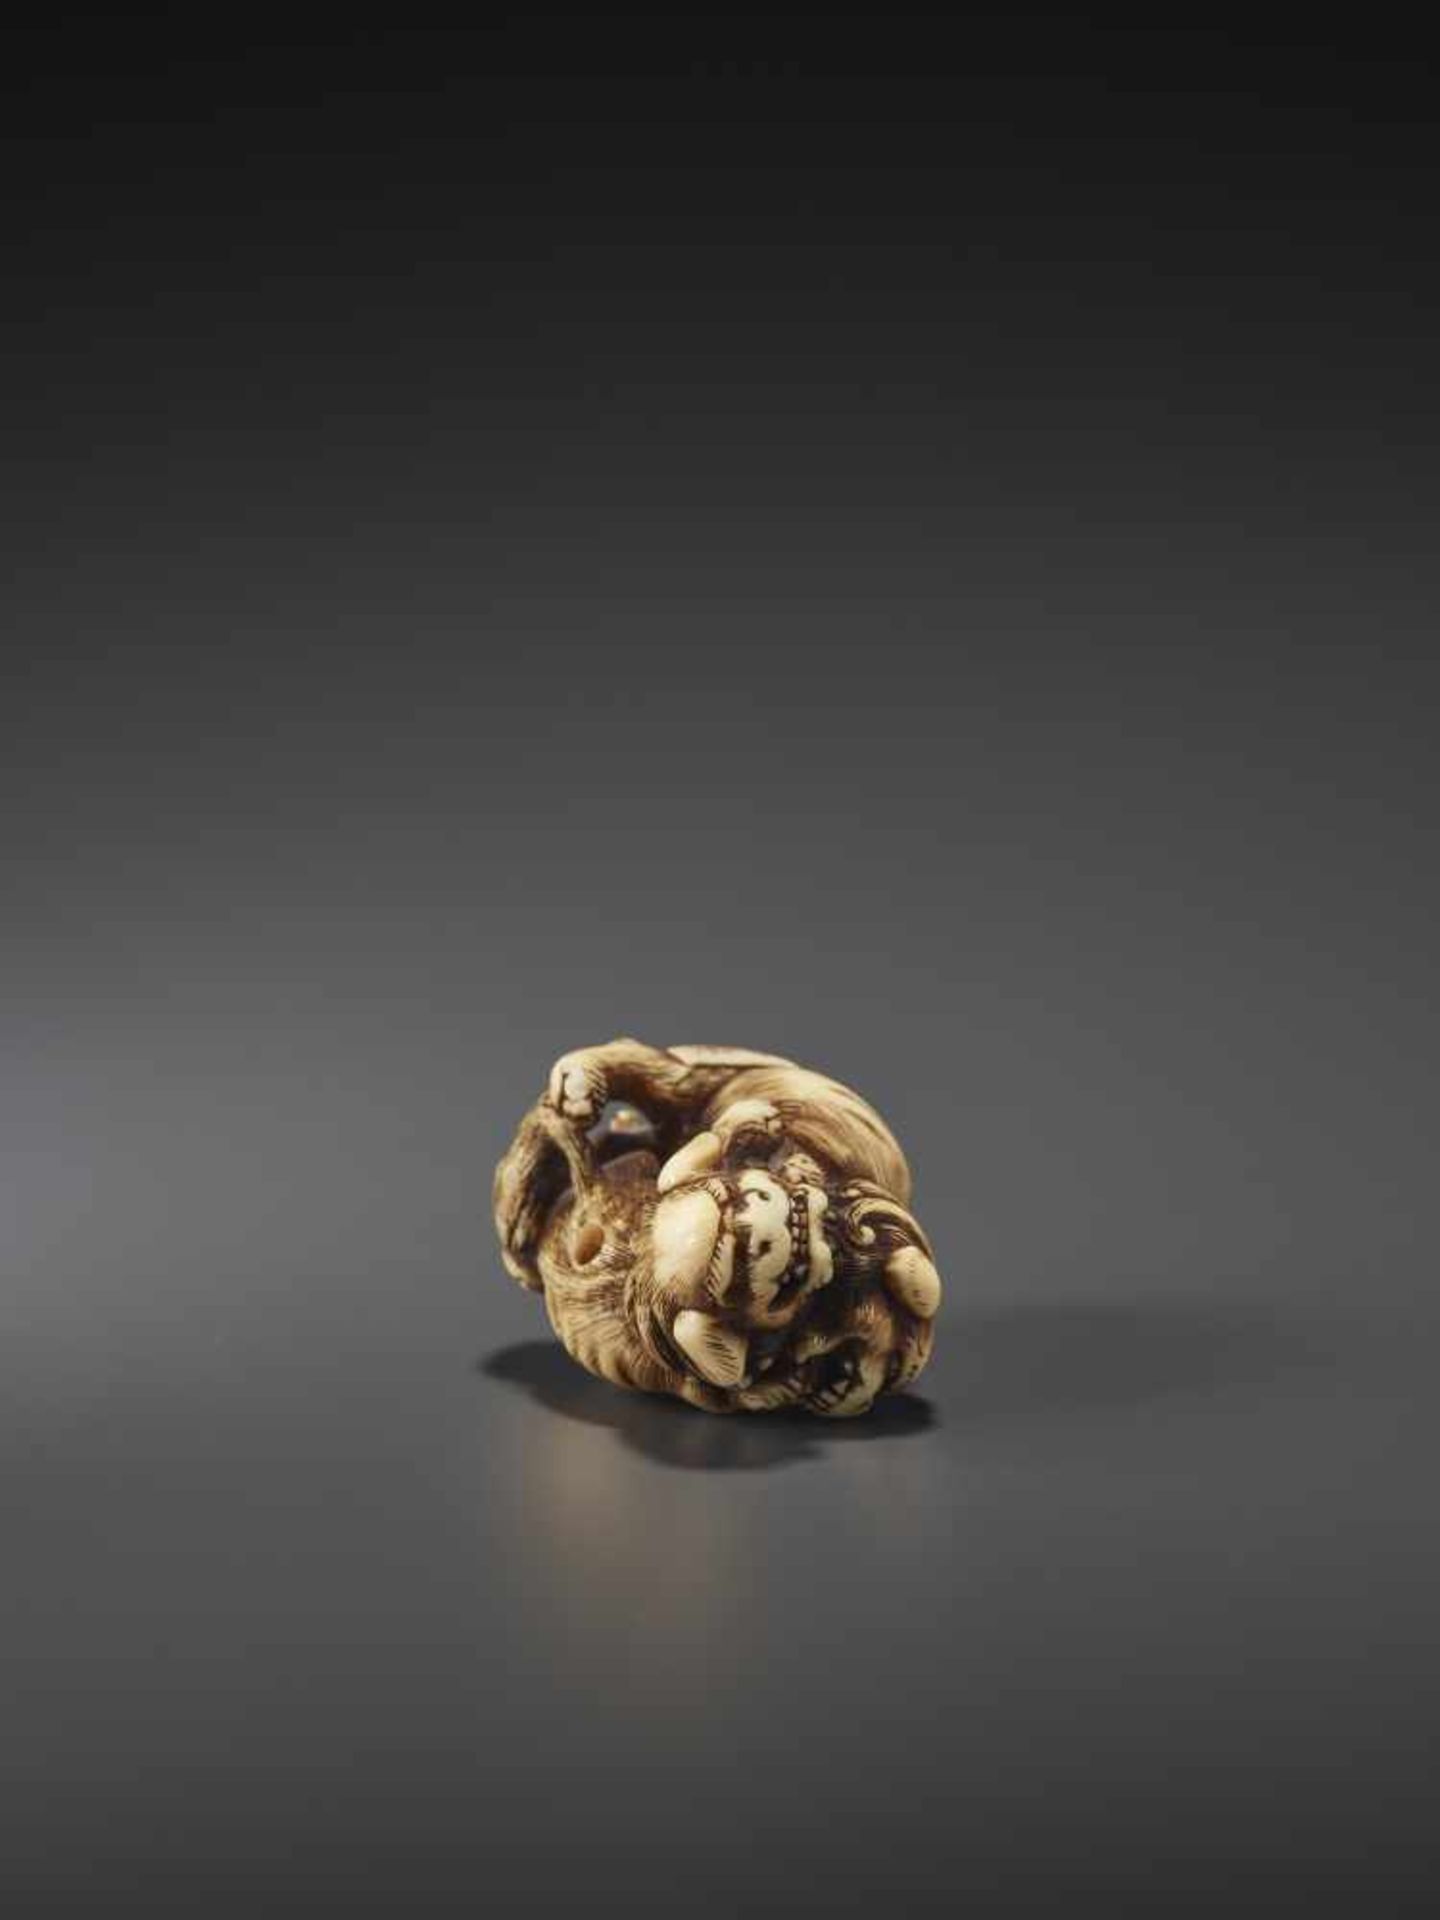 A FINE IVORY NETSUKE OF TWO FIGHTING SHISHI BY KINSHI By Kinshi, ivory netsukeJapan, 19th century, - Image 2 of 10